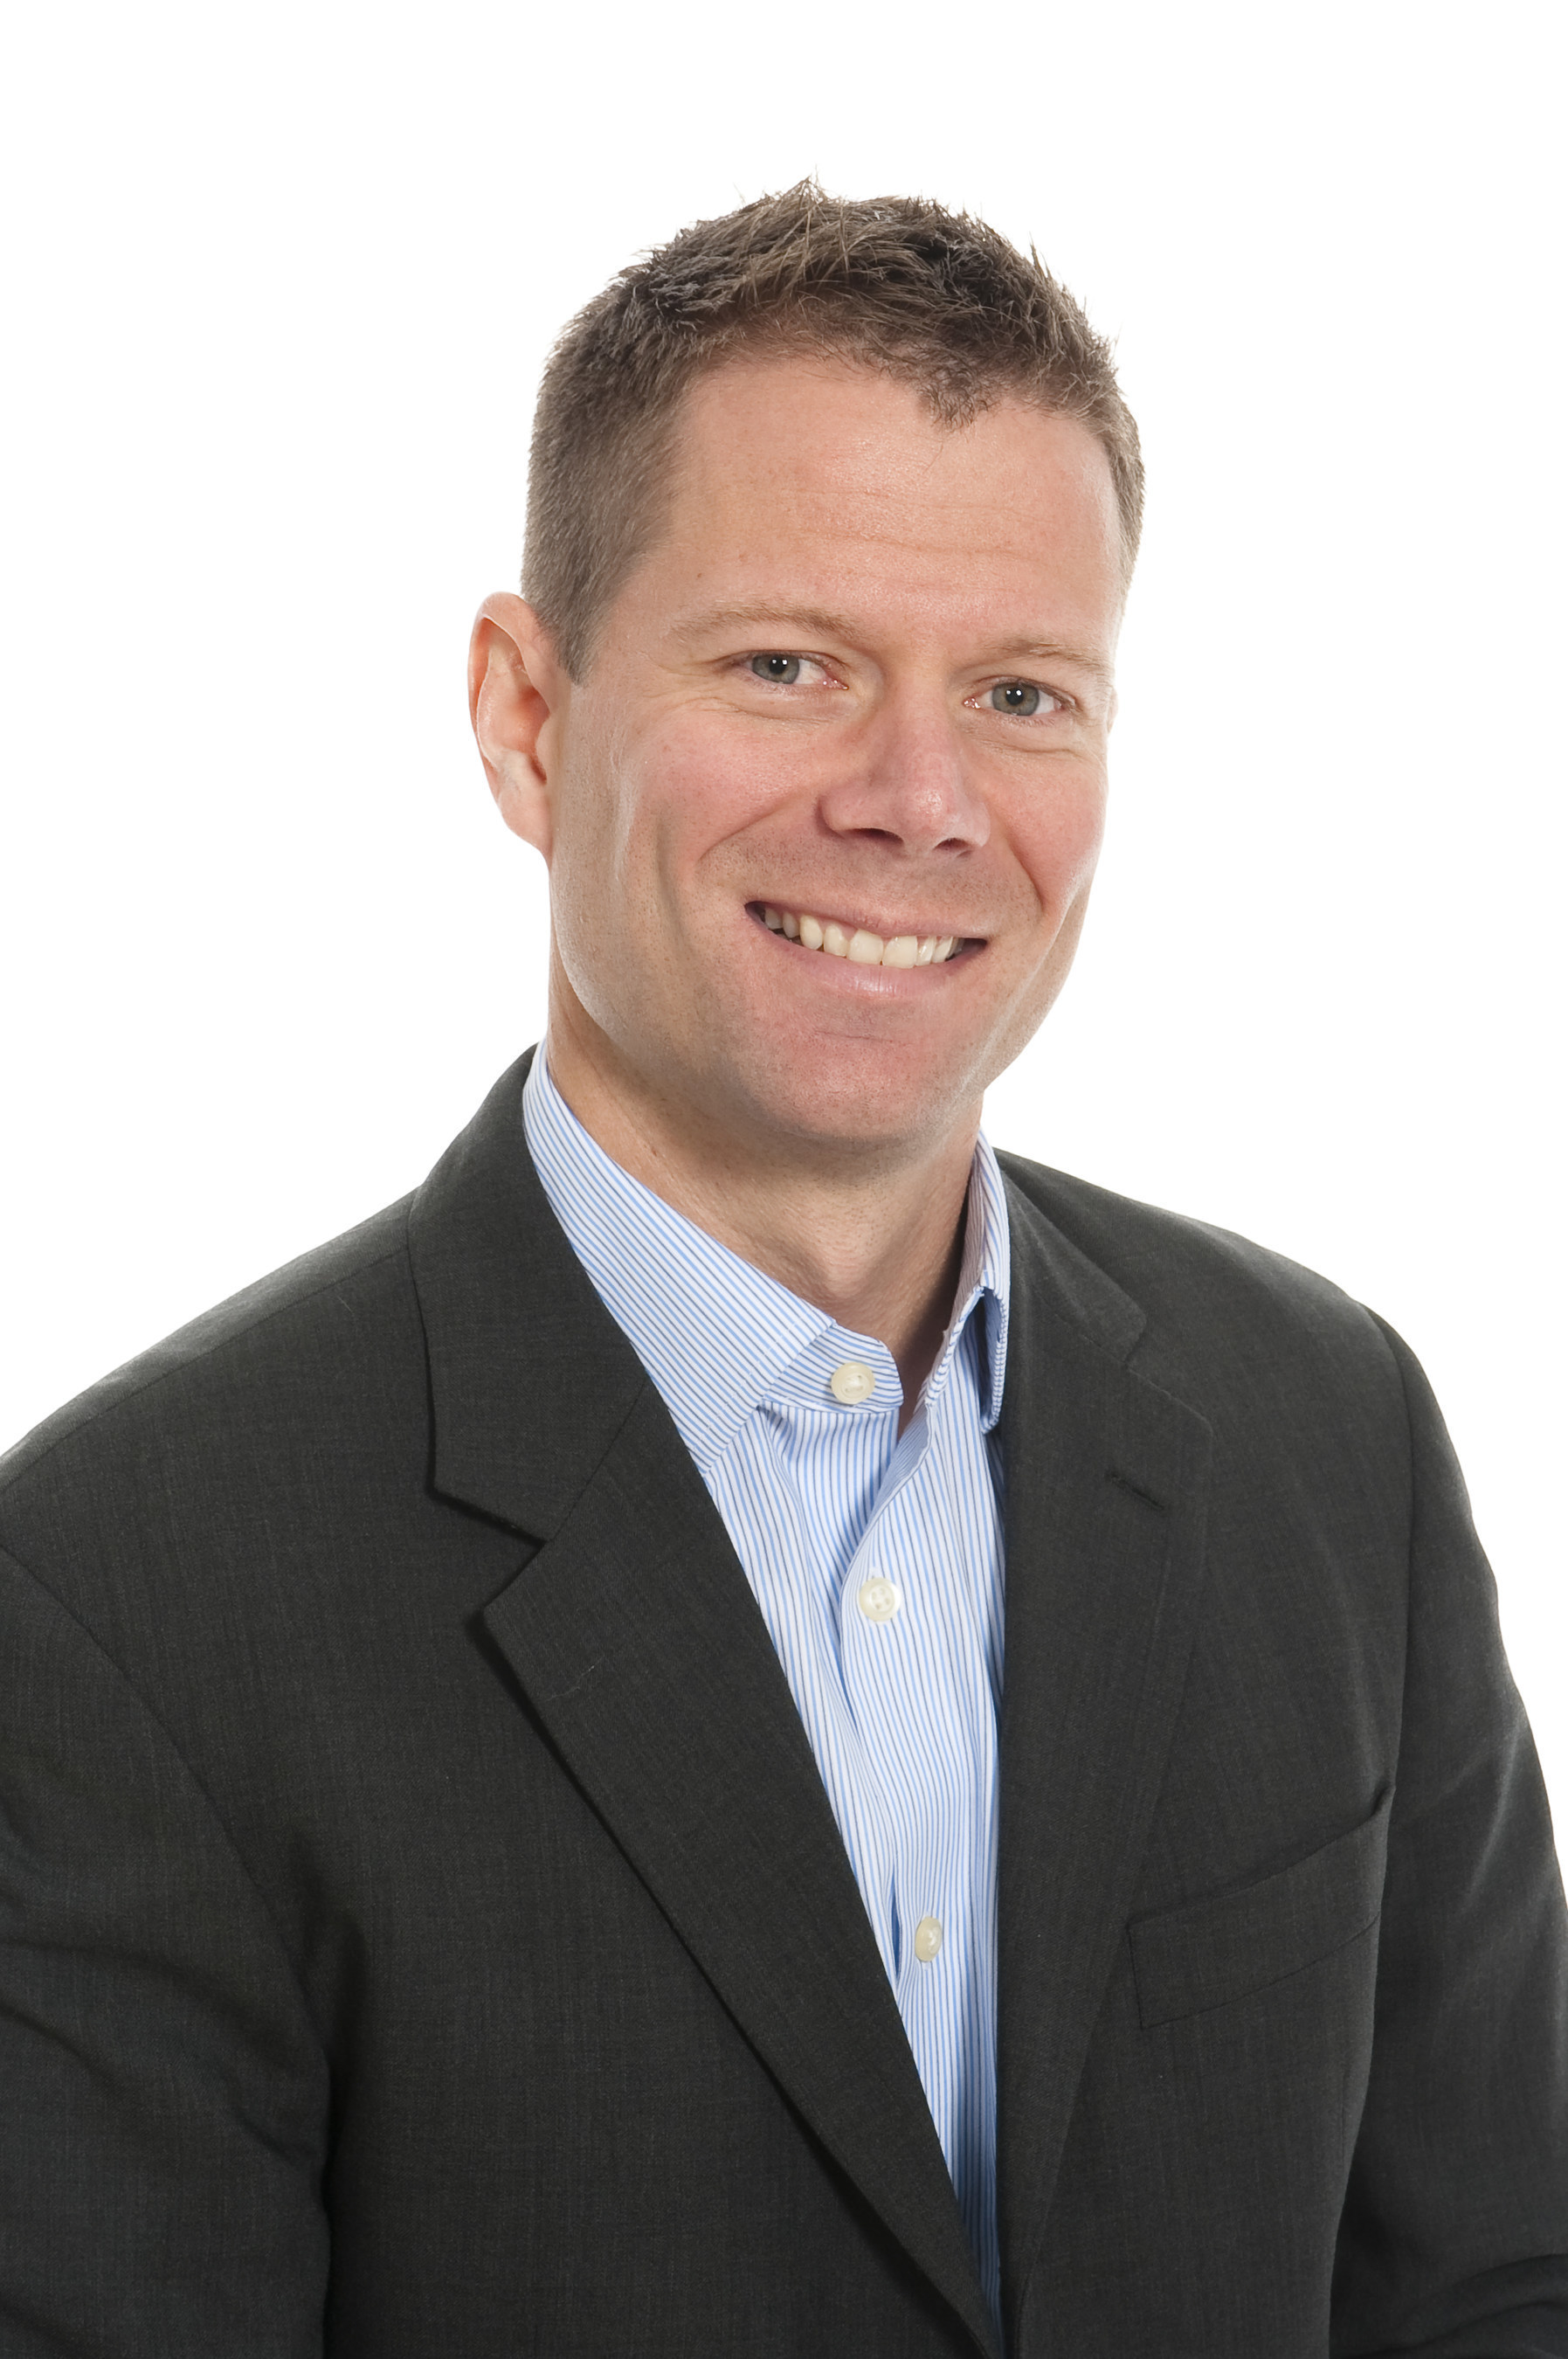 Paul Marvin will become president of Marvin Windows and Doors on January 1, 2016.